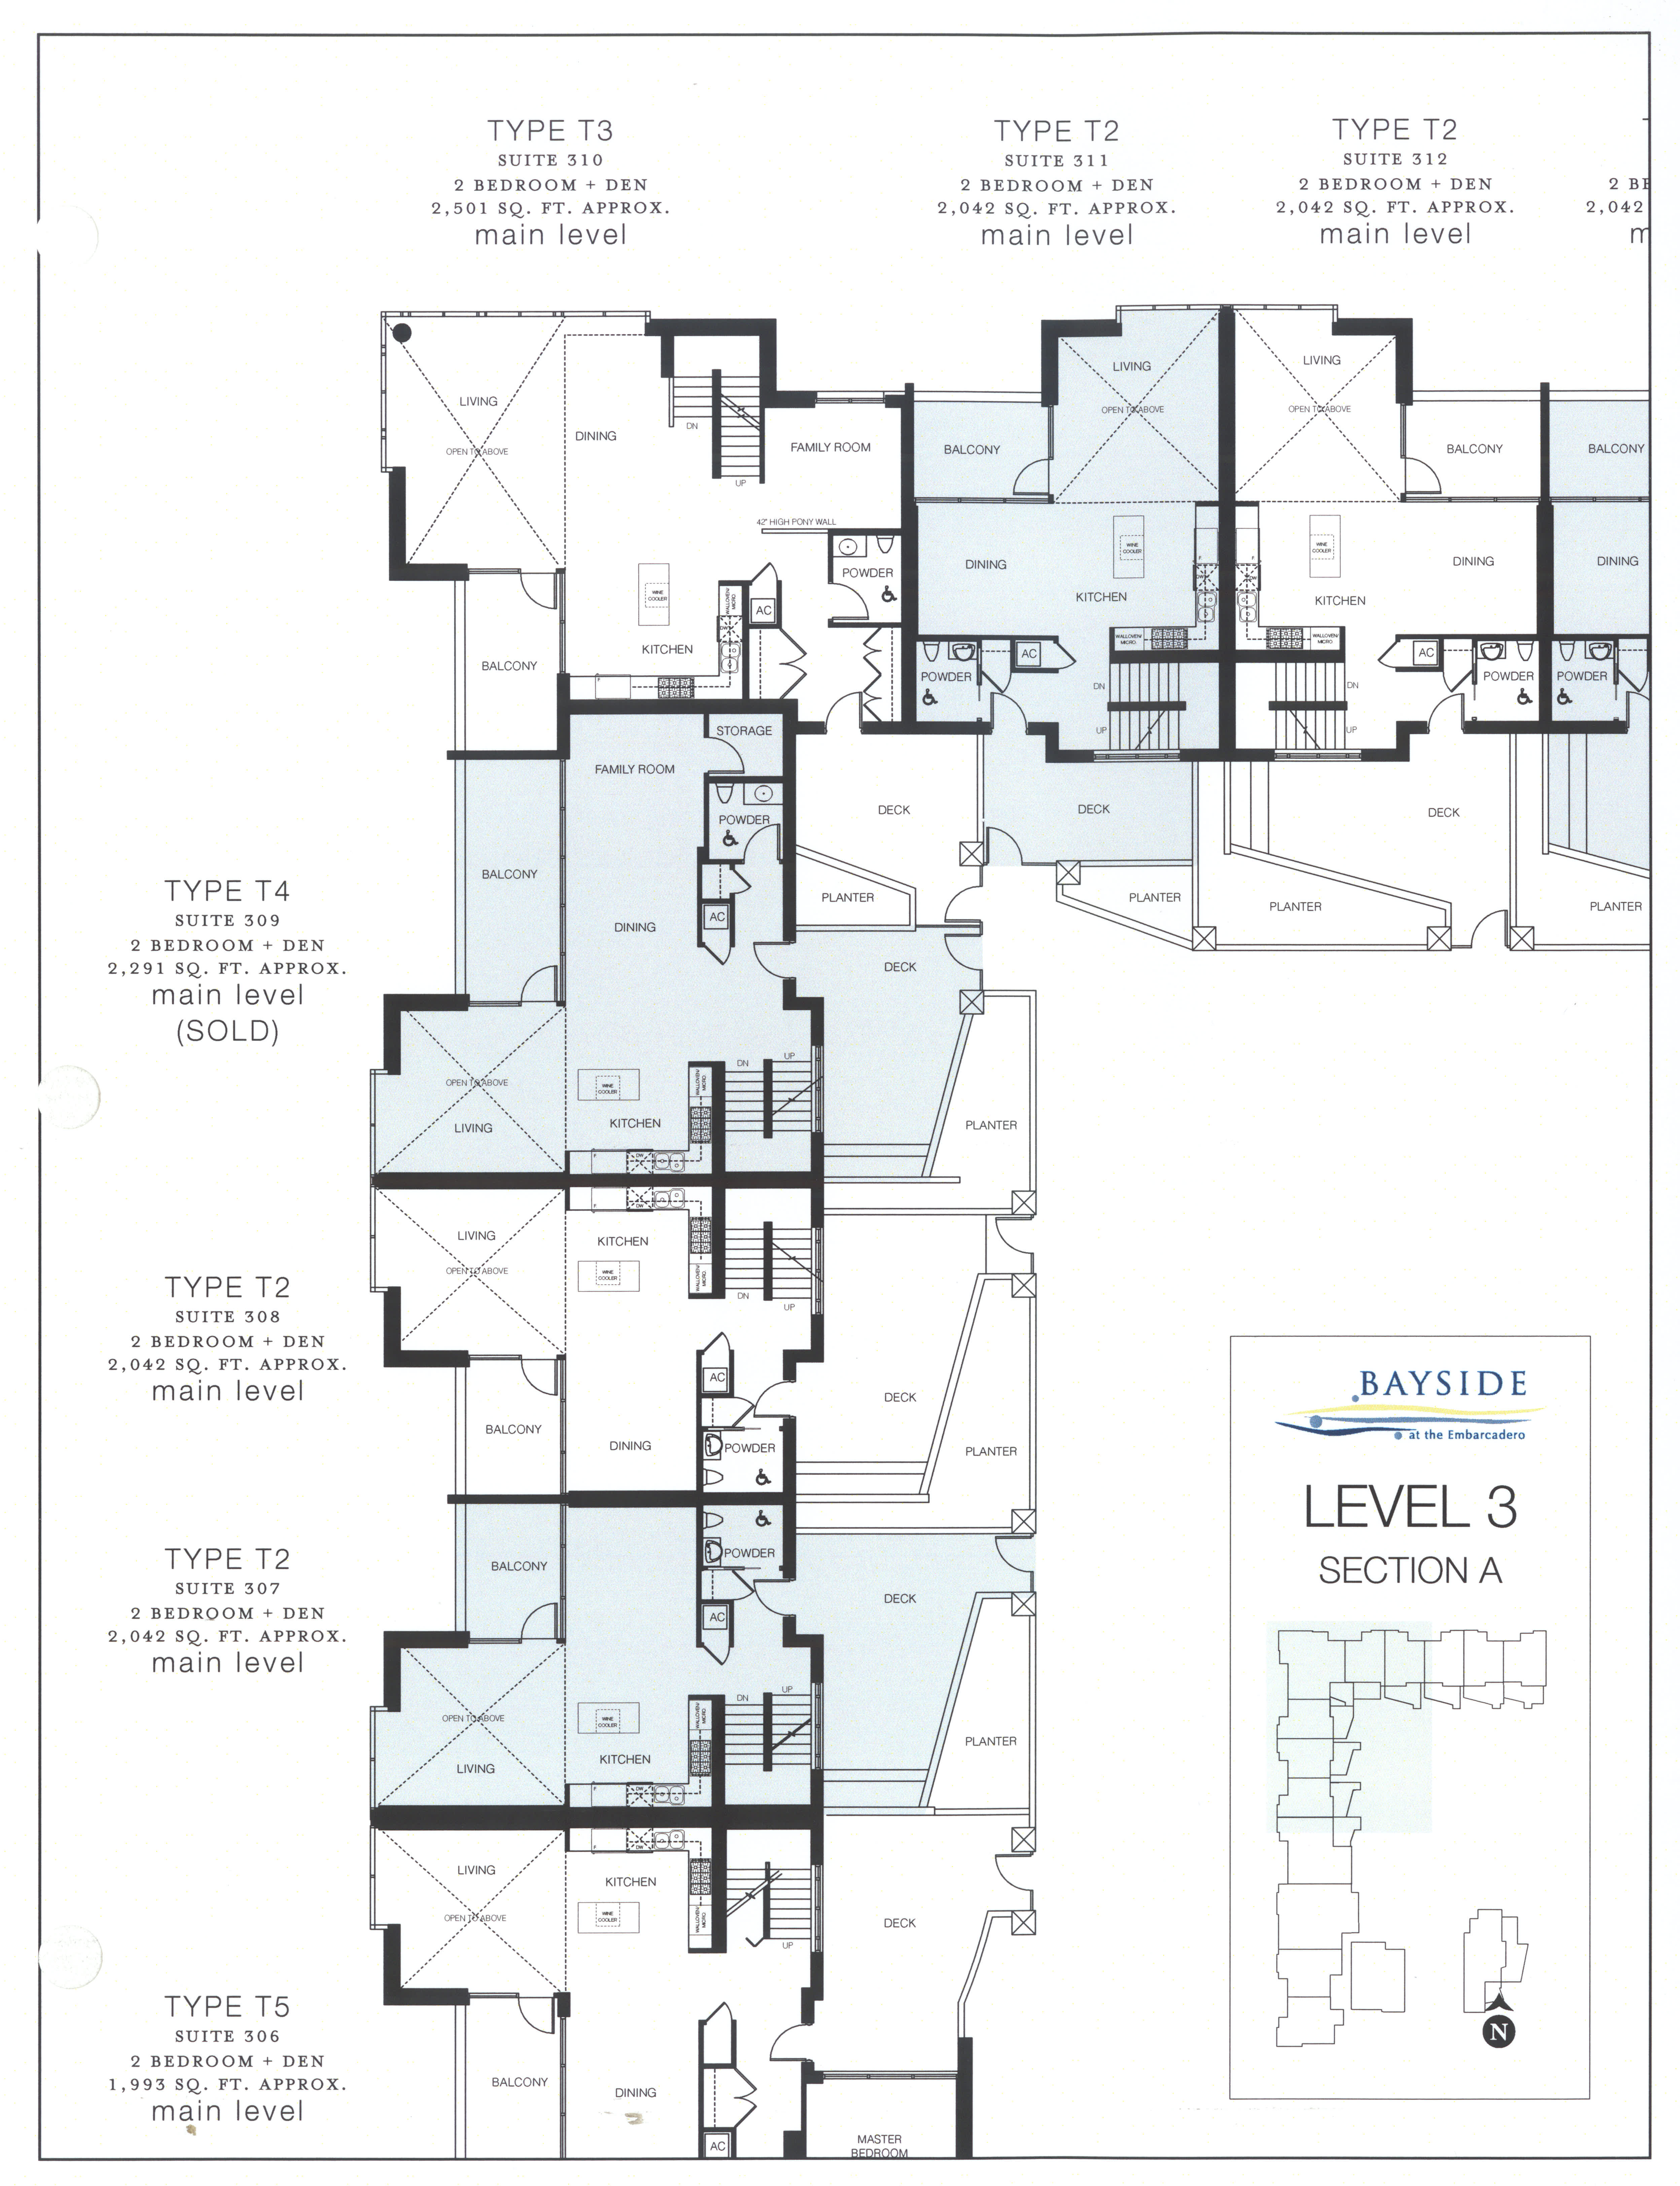 Bayside Floor Plan Level 3 Section A